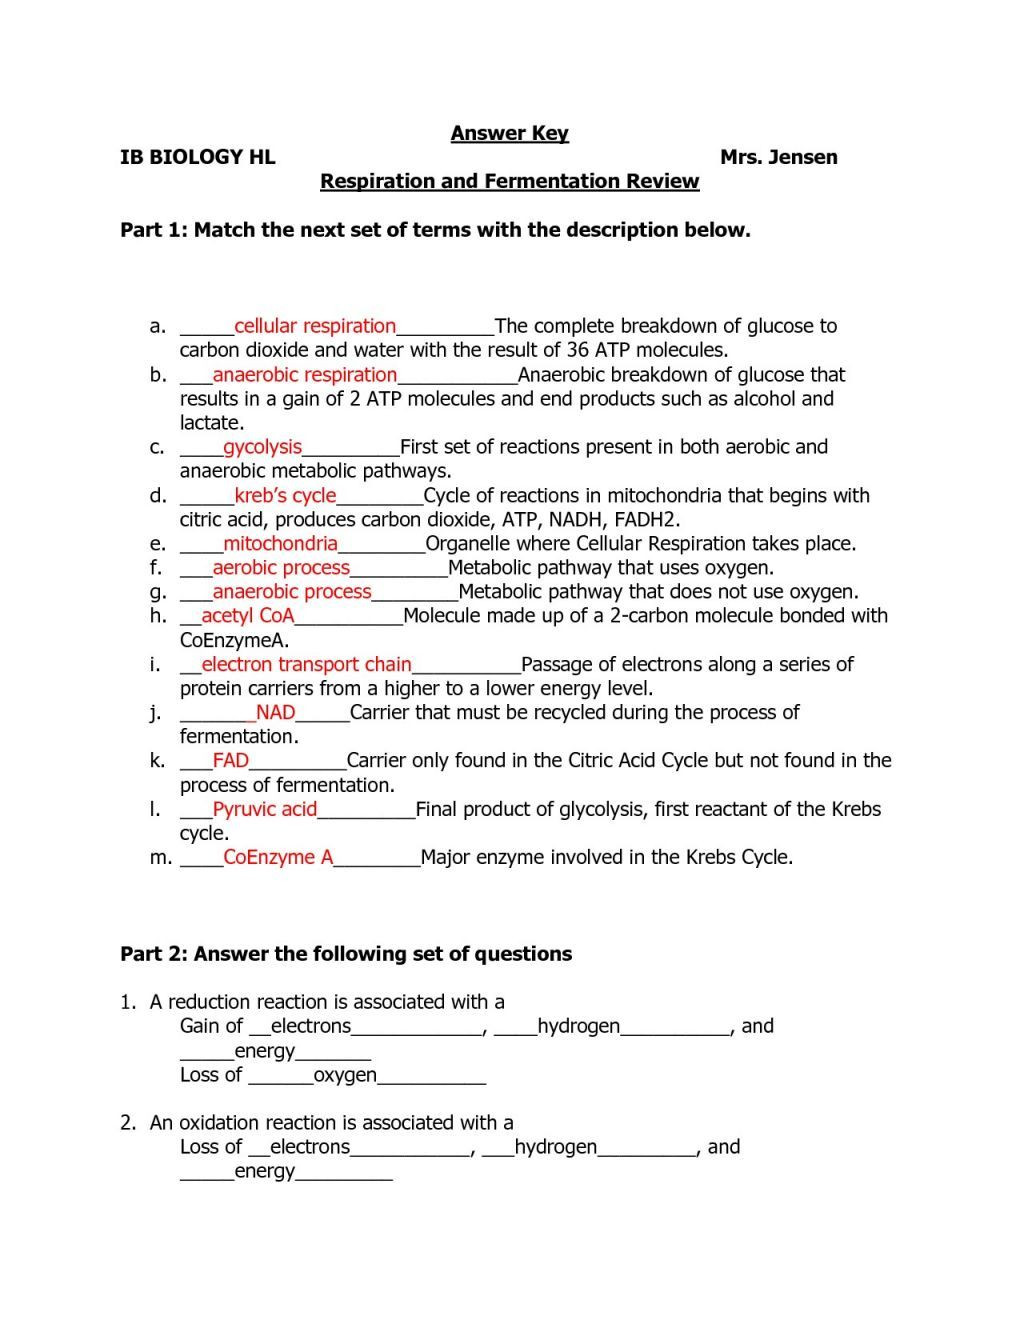 Nutrition Label Worksheet Answers Macromolecules and Nutrition Label Worksheet Answers Nidecmege